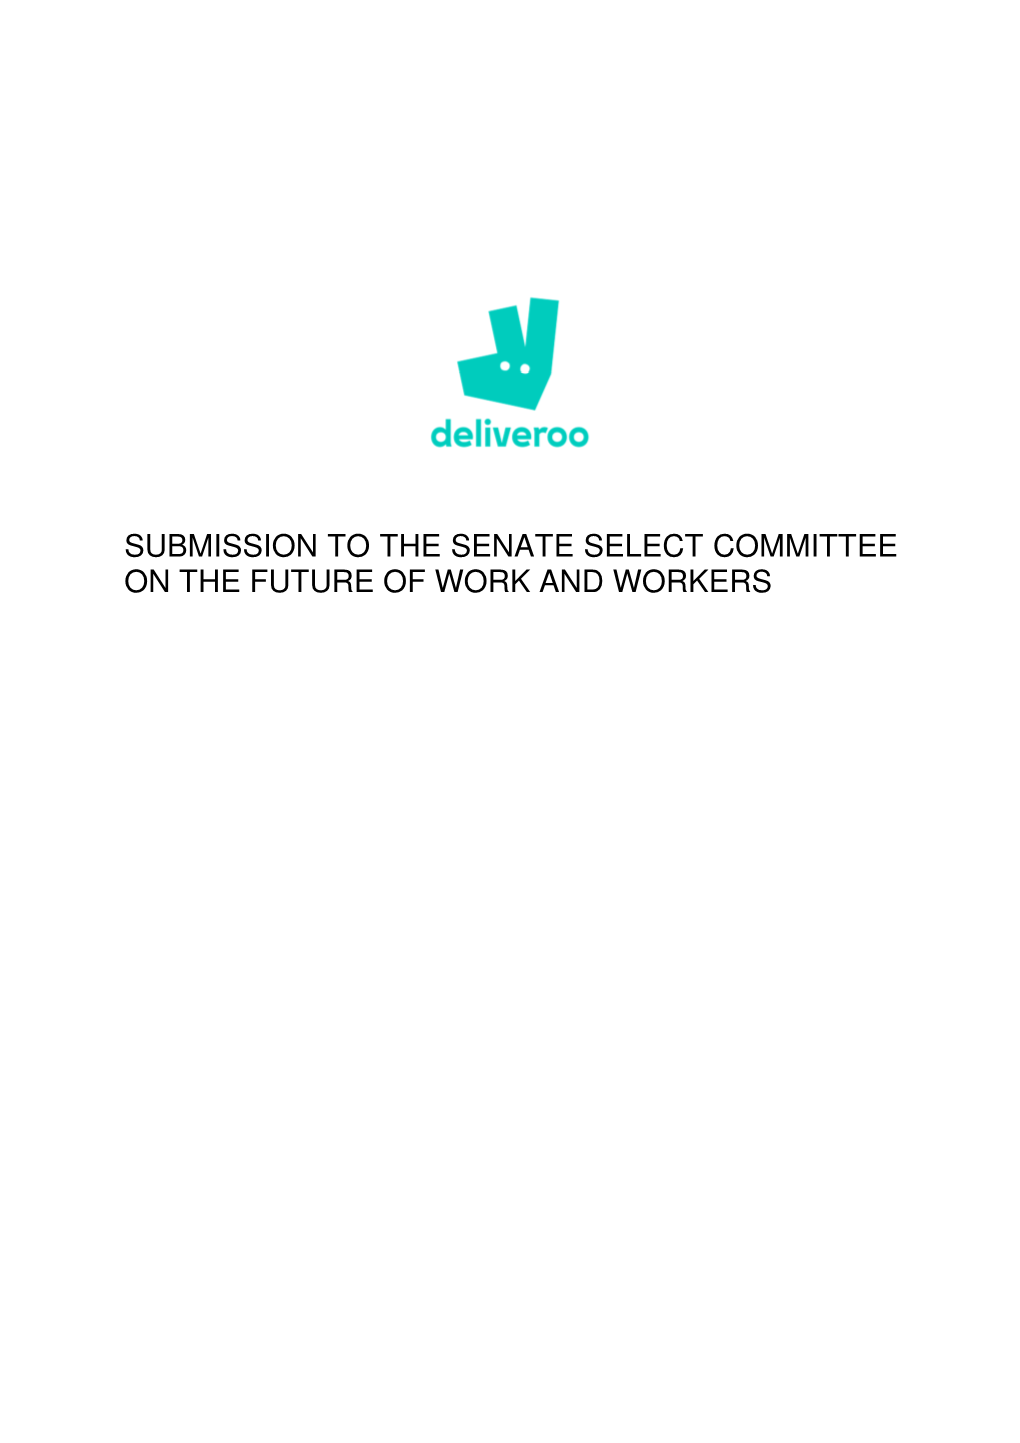 Deliveroo Is Pleased to Contribute to the Australian Senate’S Select Committee on the Future of Work and Workers